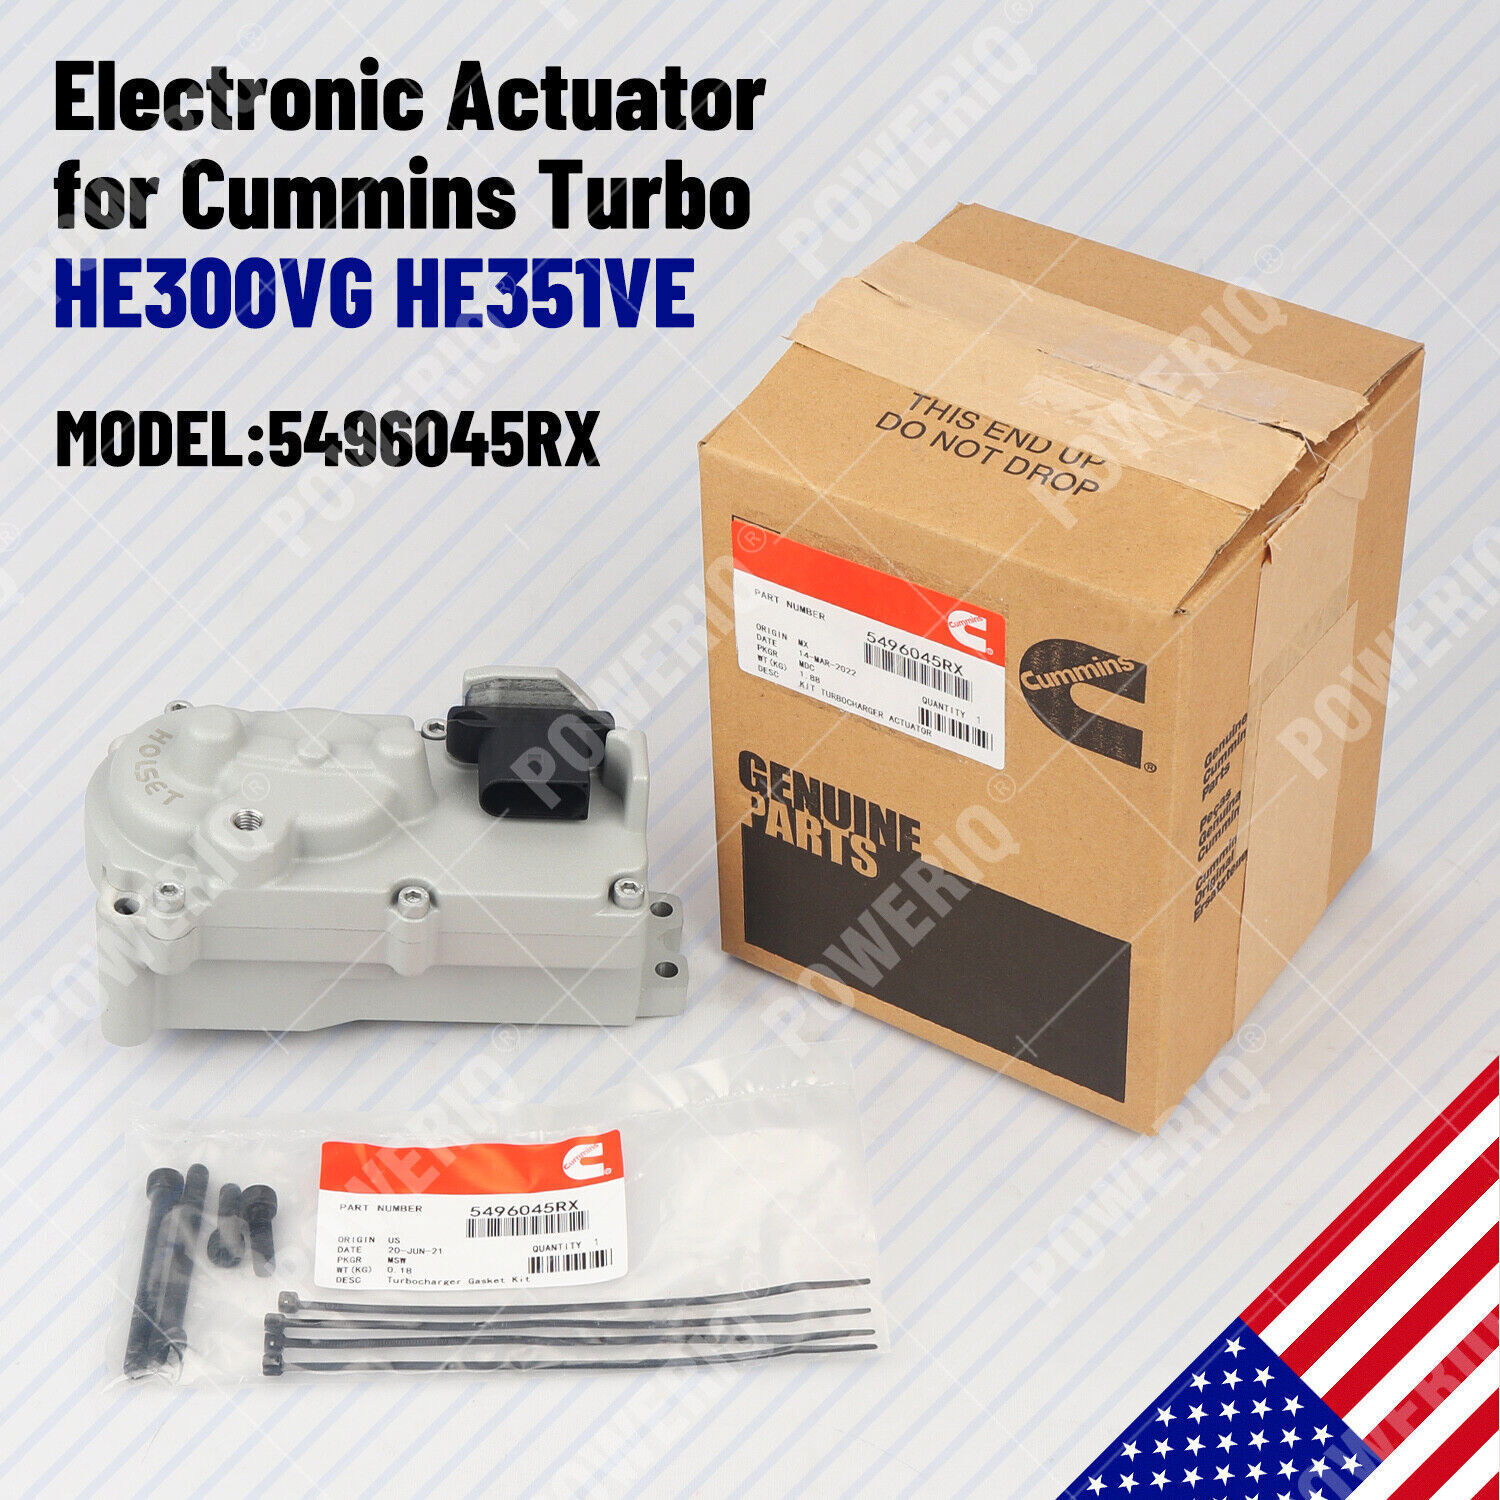 5496045 RX VGT Electronic Actuator for Cummins Turbo HE300VG HE351VE